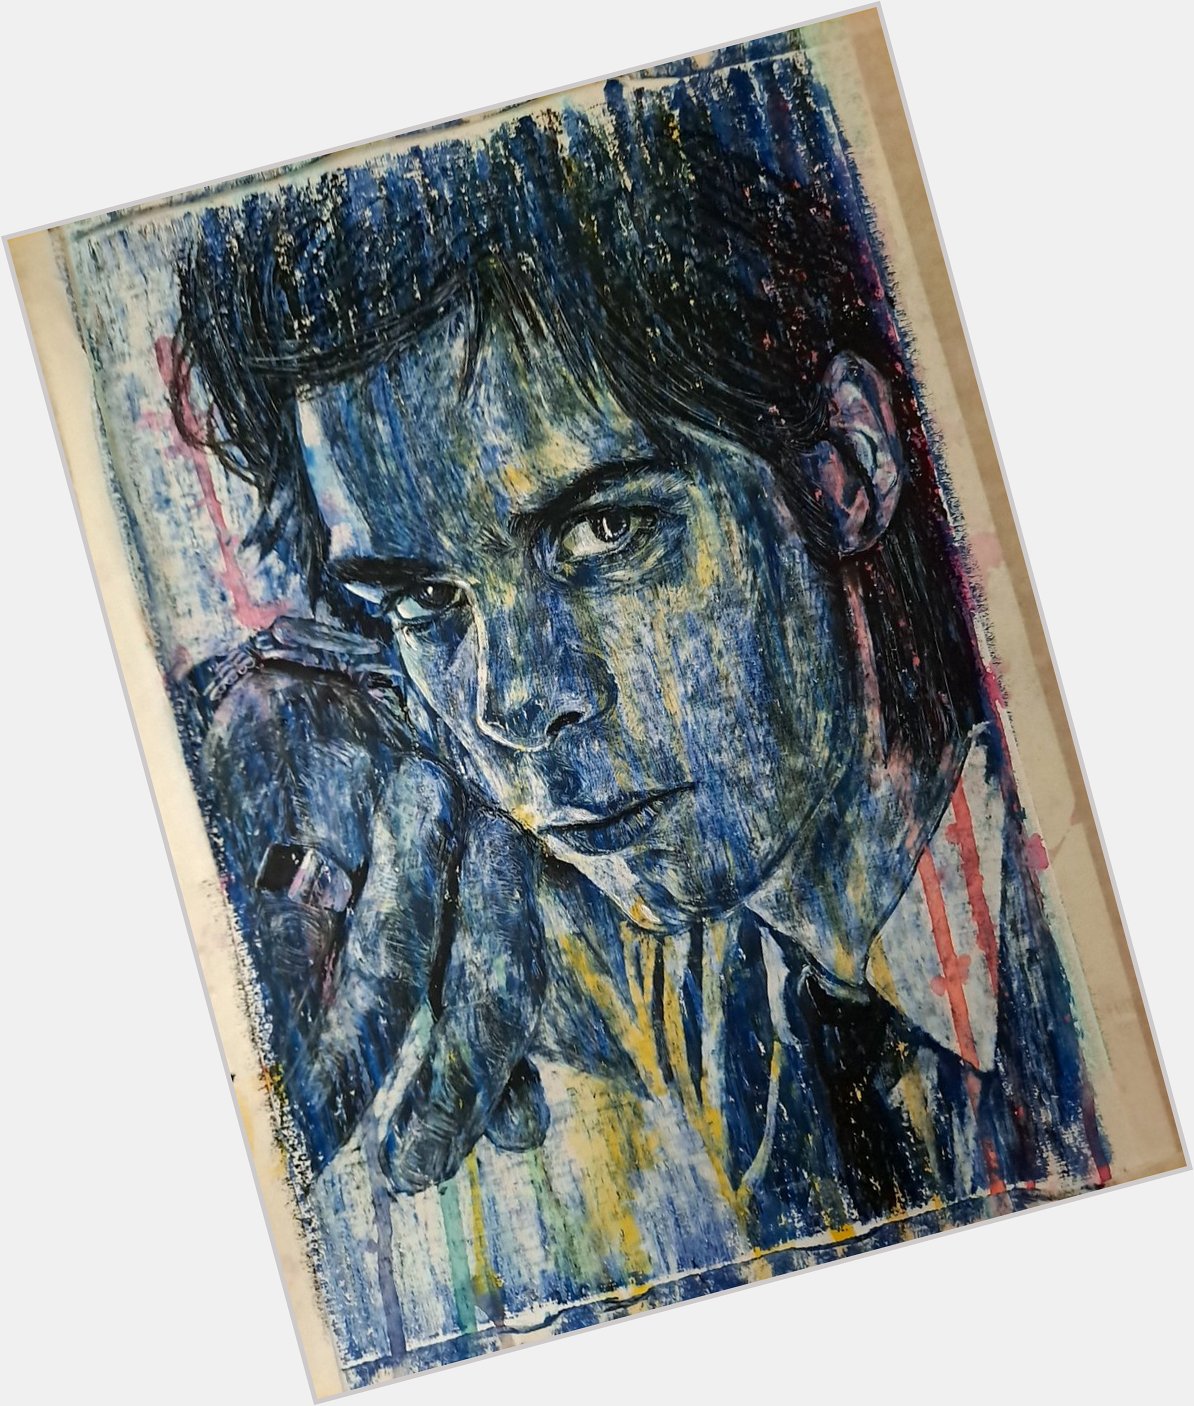 Happy birthday Nick Cave! 

This picture: Oil and ink on acrylic paper, 21cm x 30cm. 